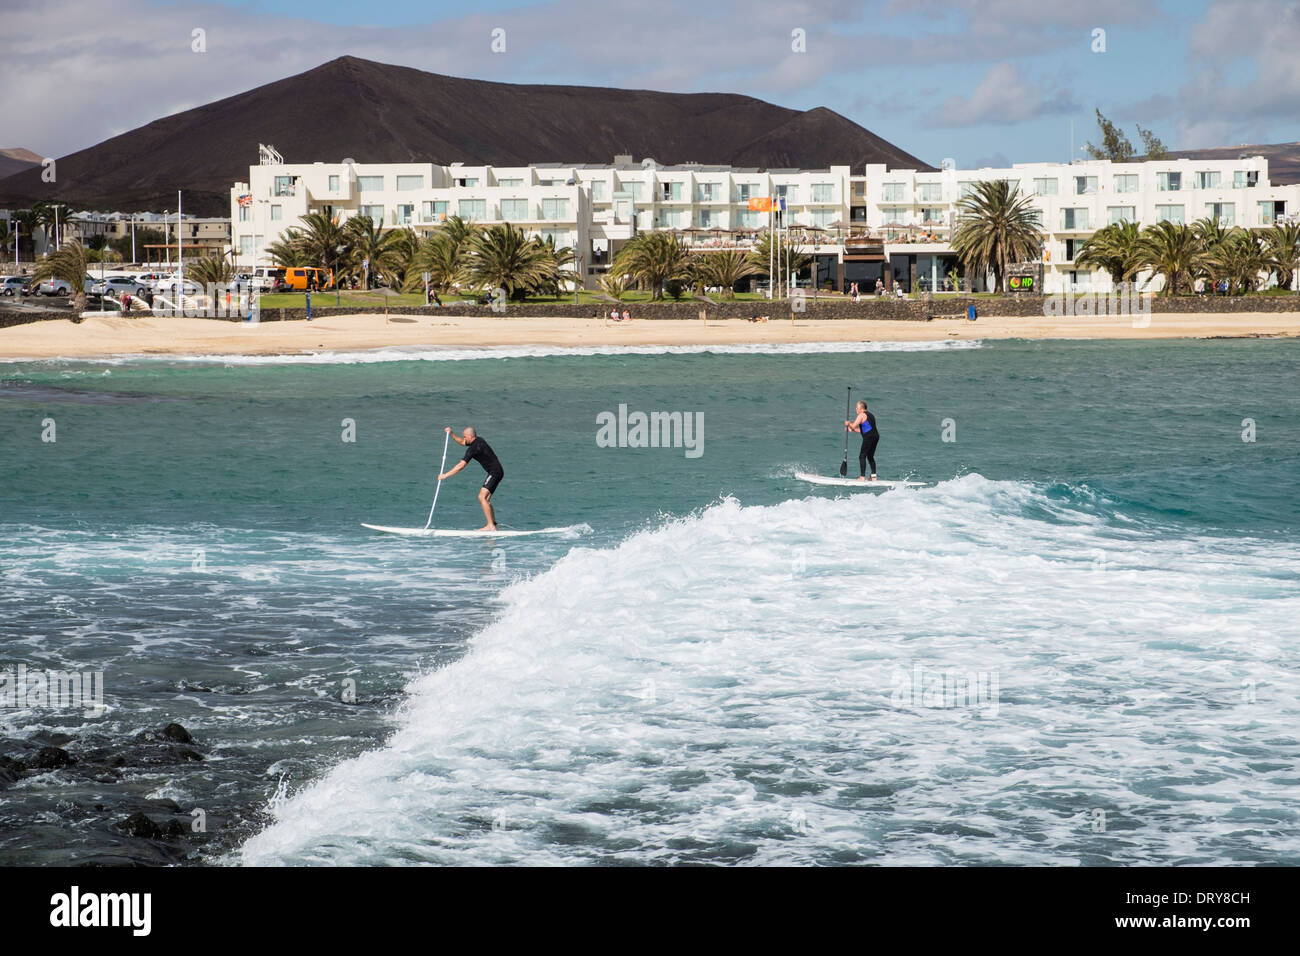 Two men on surf boards paddleboarding on big waves in sea off Playa Charcos beach in Costa Teguise, Lanzarote, Canary Islands Stock Photo